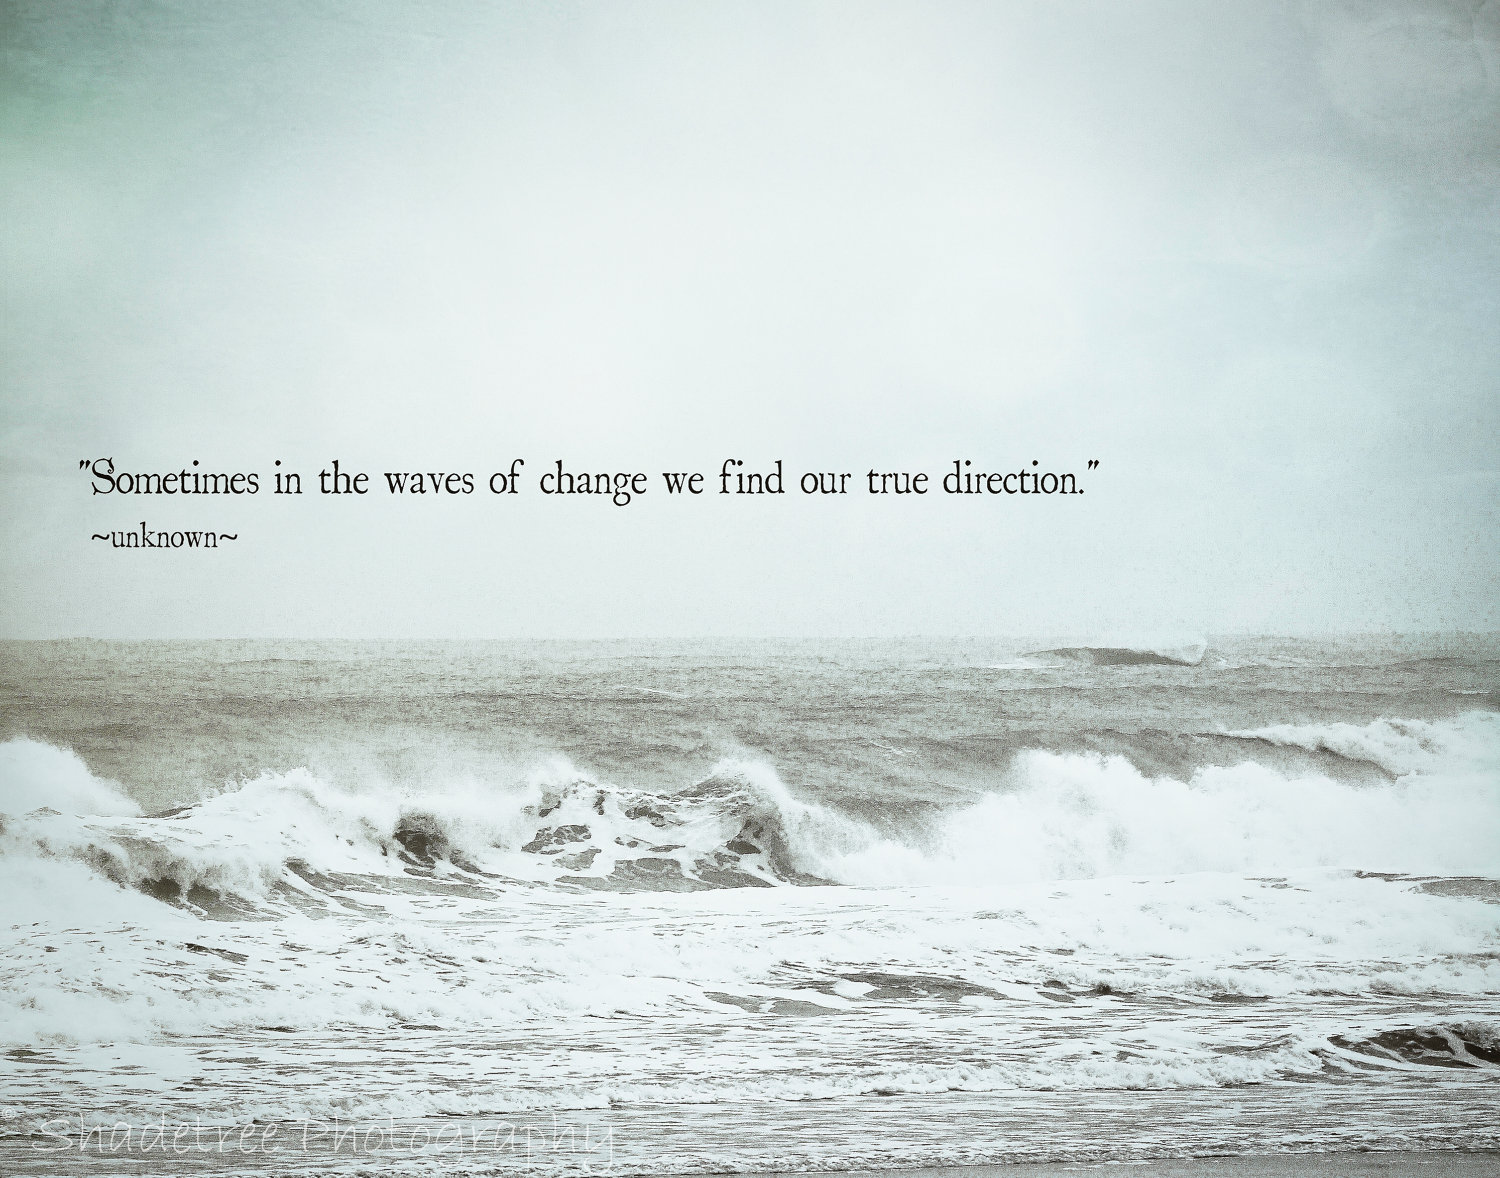 Sometimes in the waves of change, we find our true direction